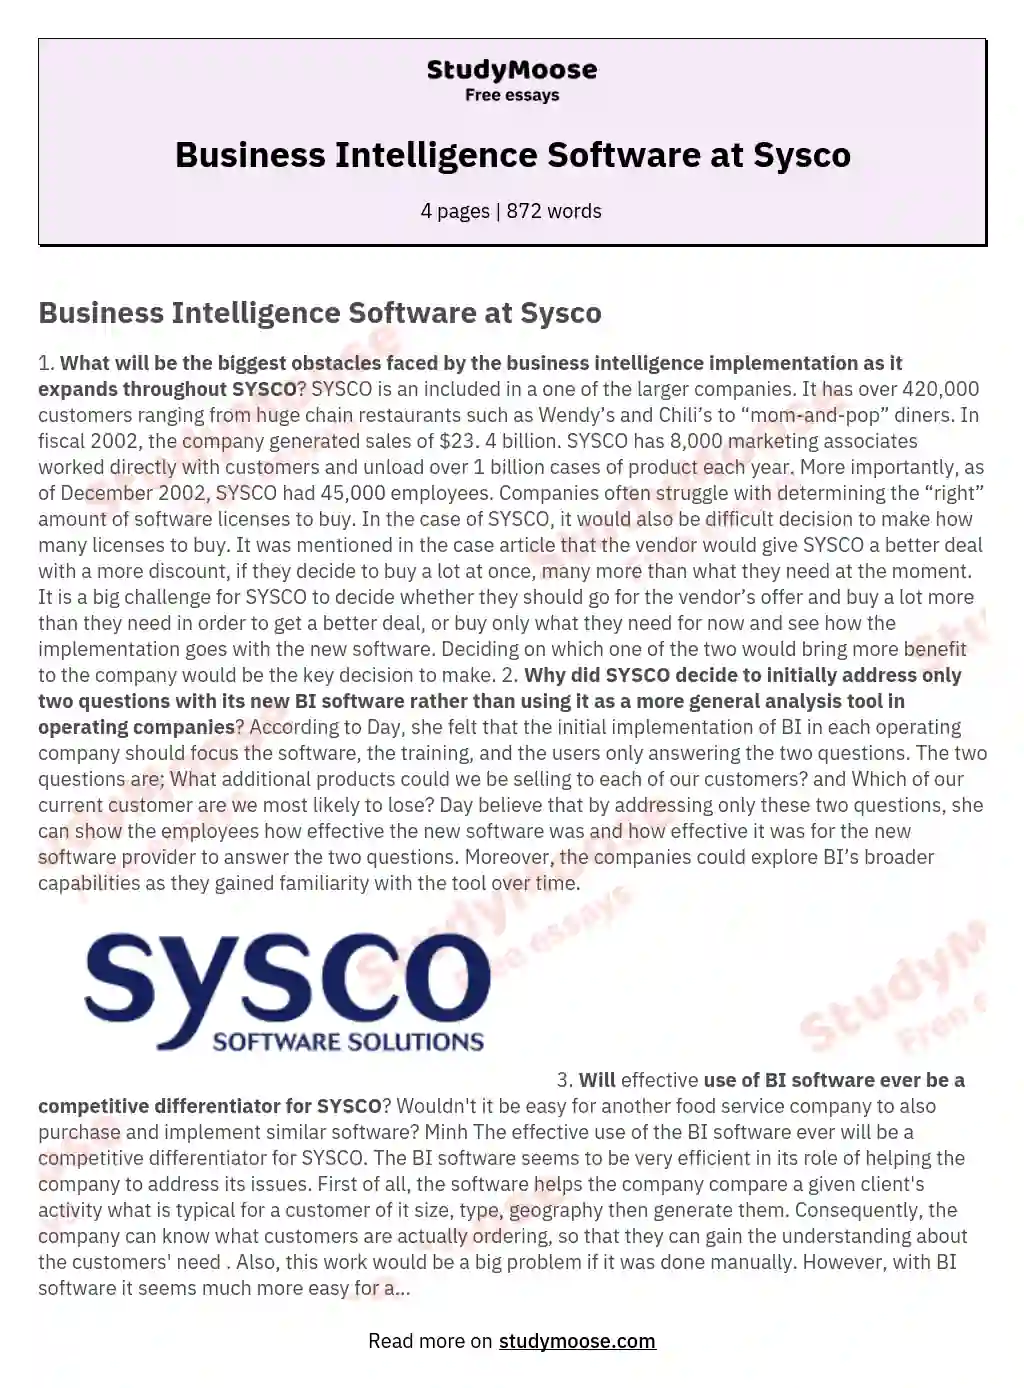 Business Intelligence Software at Sysco essay